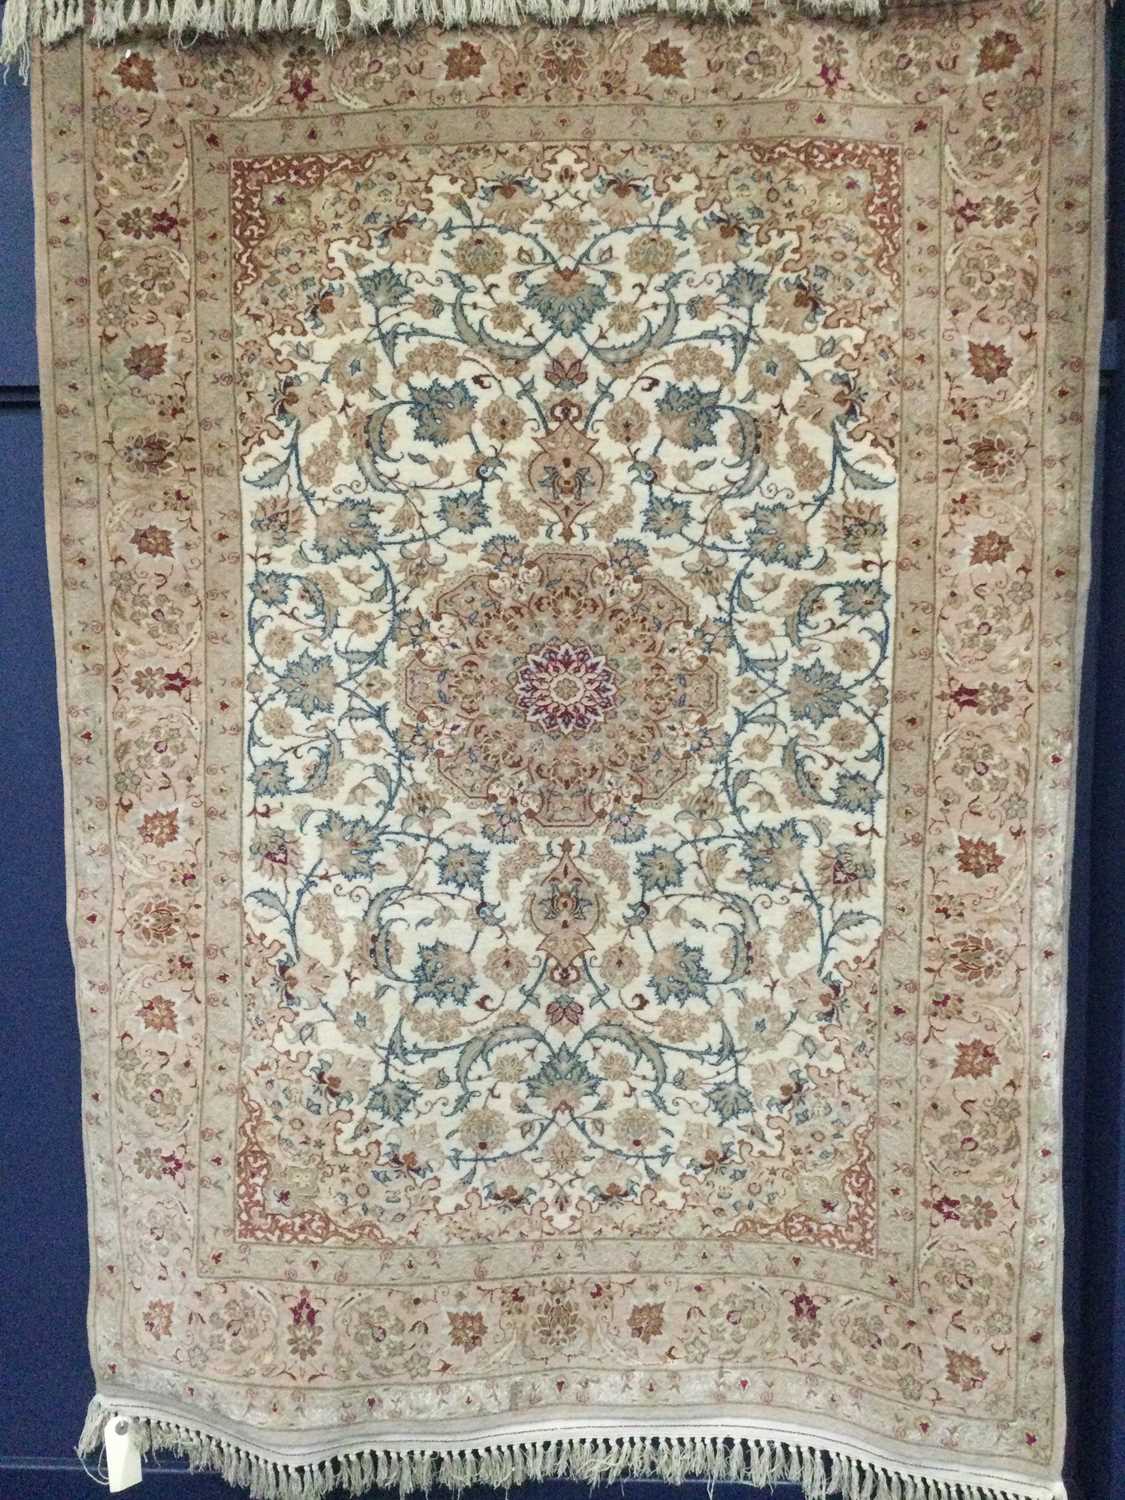 Lot 910 - A SMALL BORDERED RUG OF KASHAN DESIGN